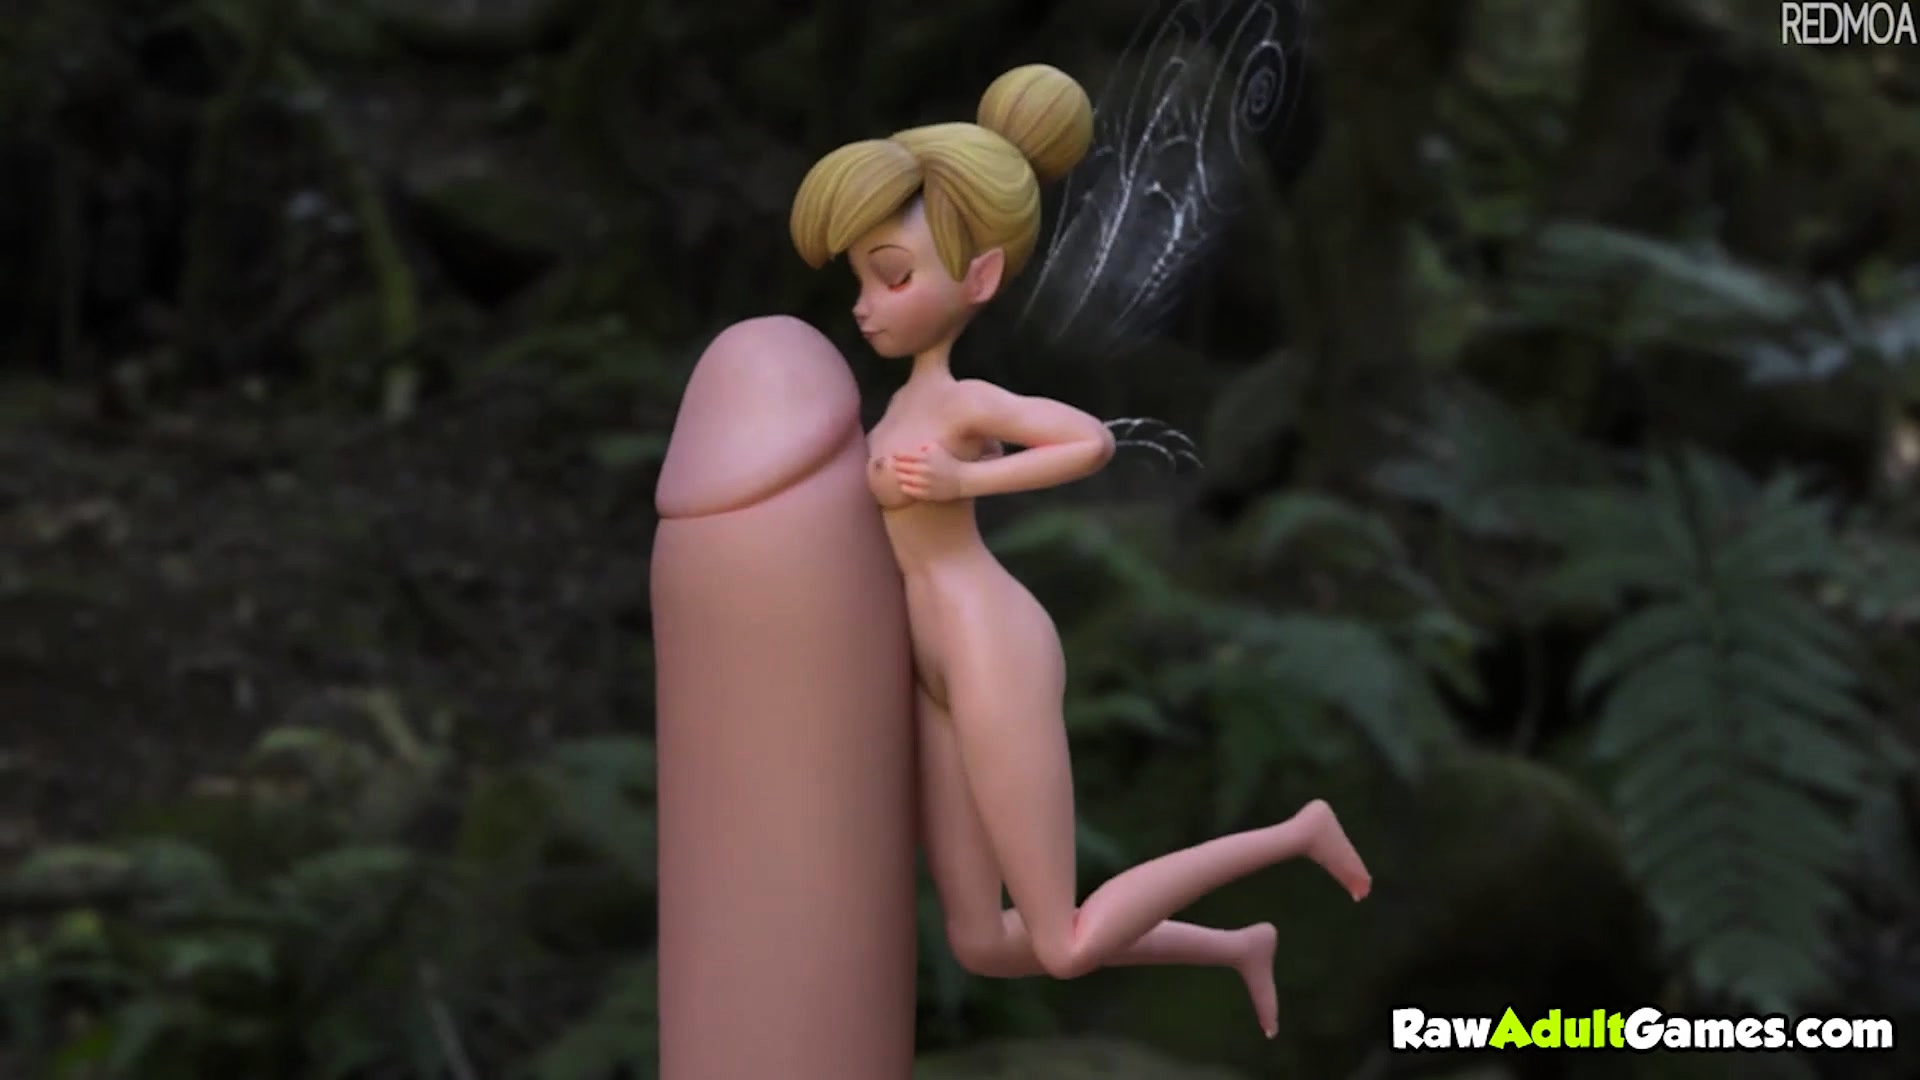 Tinkerbell Big Dick Porn - Free Mobile Porn - Tinker Bell Playing Around With Big Dick - 4035504 -  IcePorn.com